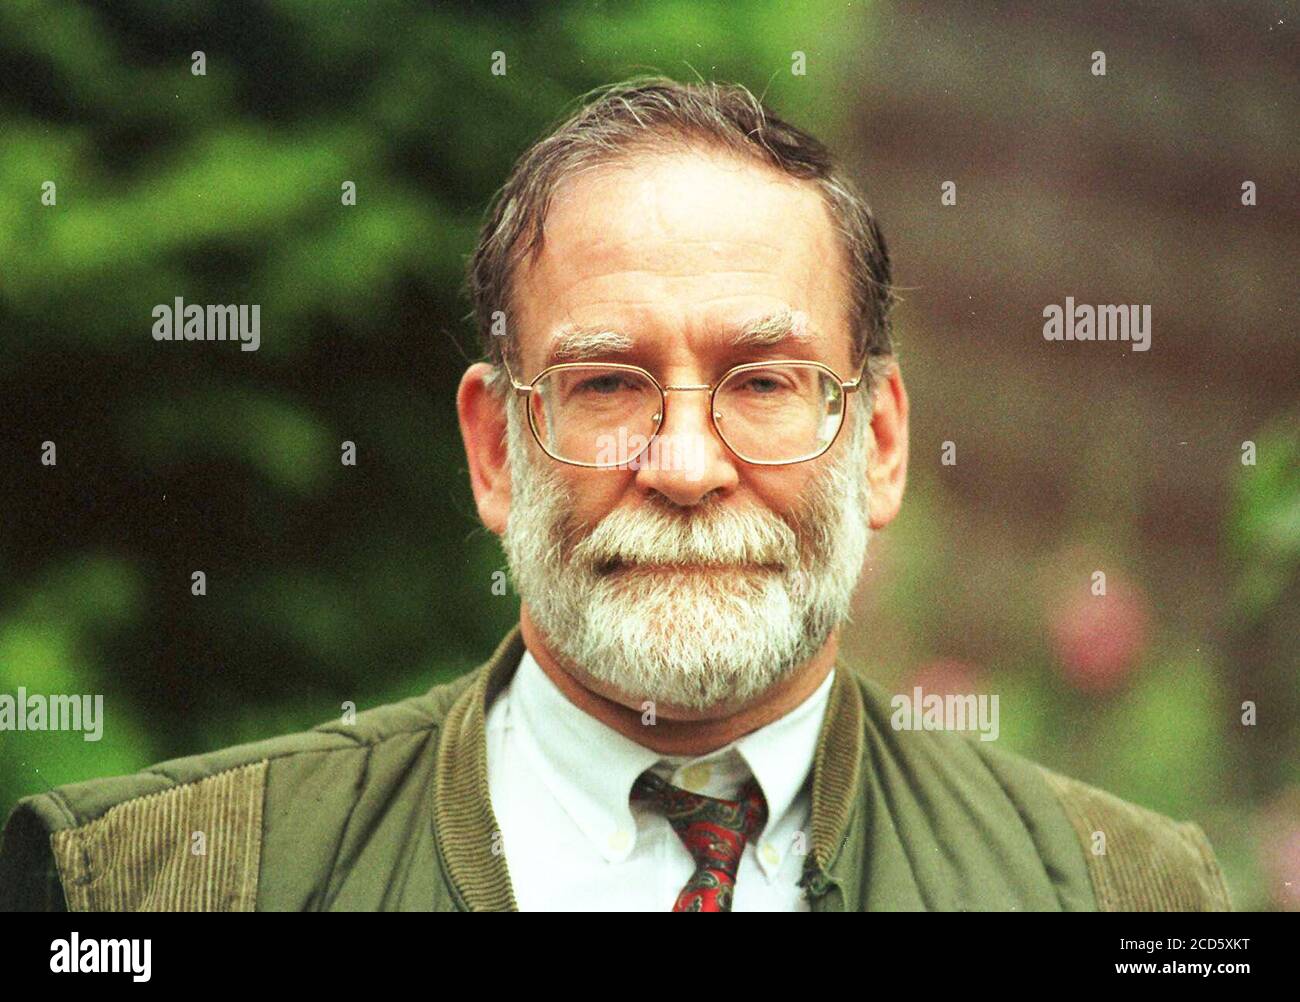 Dr.Harold Frederick Shipman, (14th January 1946-13th January 2004) was an English general prctitioner who is beleived to be the most prolific seriel killer in modern history. On 31st January 2000 a jury found Shipman guilty of fifteen patients under his care, with his total number of victims approximately 250. Shipman was sentenced to life imprisonment. He committed suicide by hanging on 13th January 2004 a day before his 58th birthday in his cell at Wakefield Prison, West Yorkshire, UK. Pic by Ray Bradbury Stock Photo